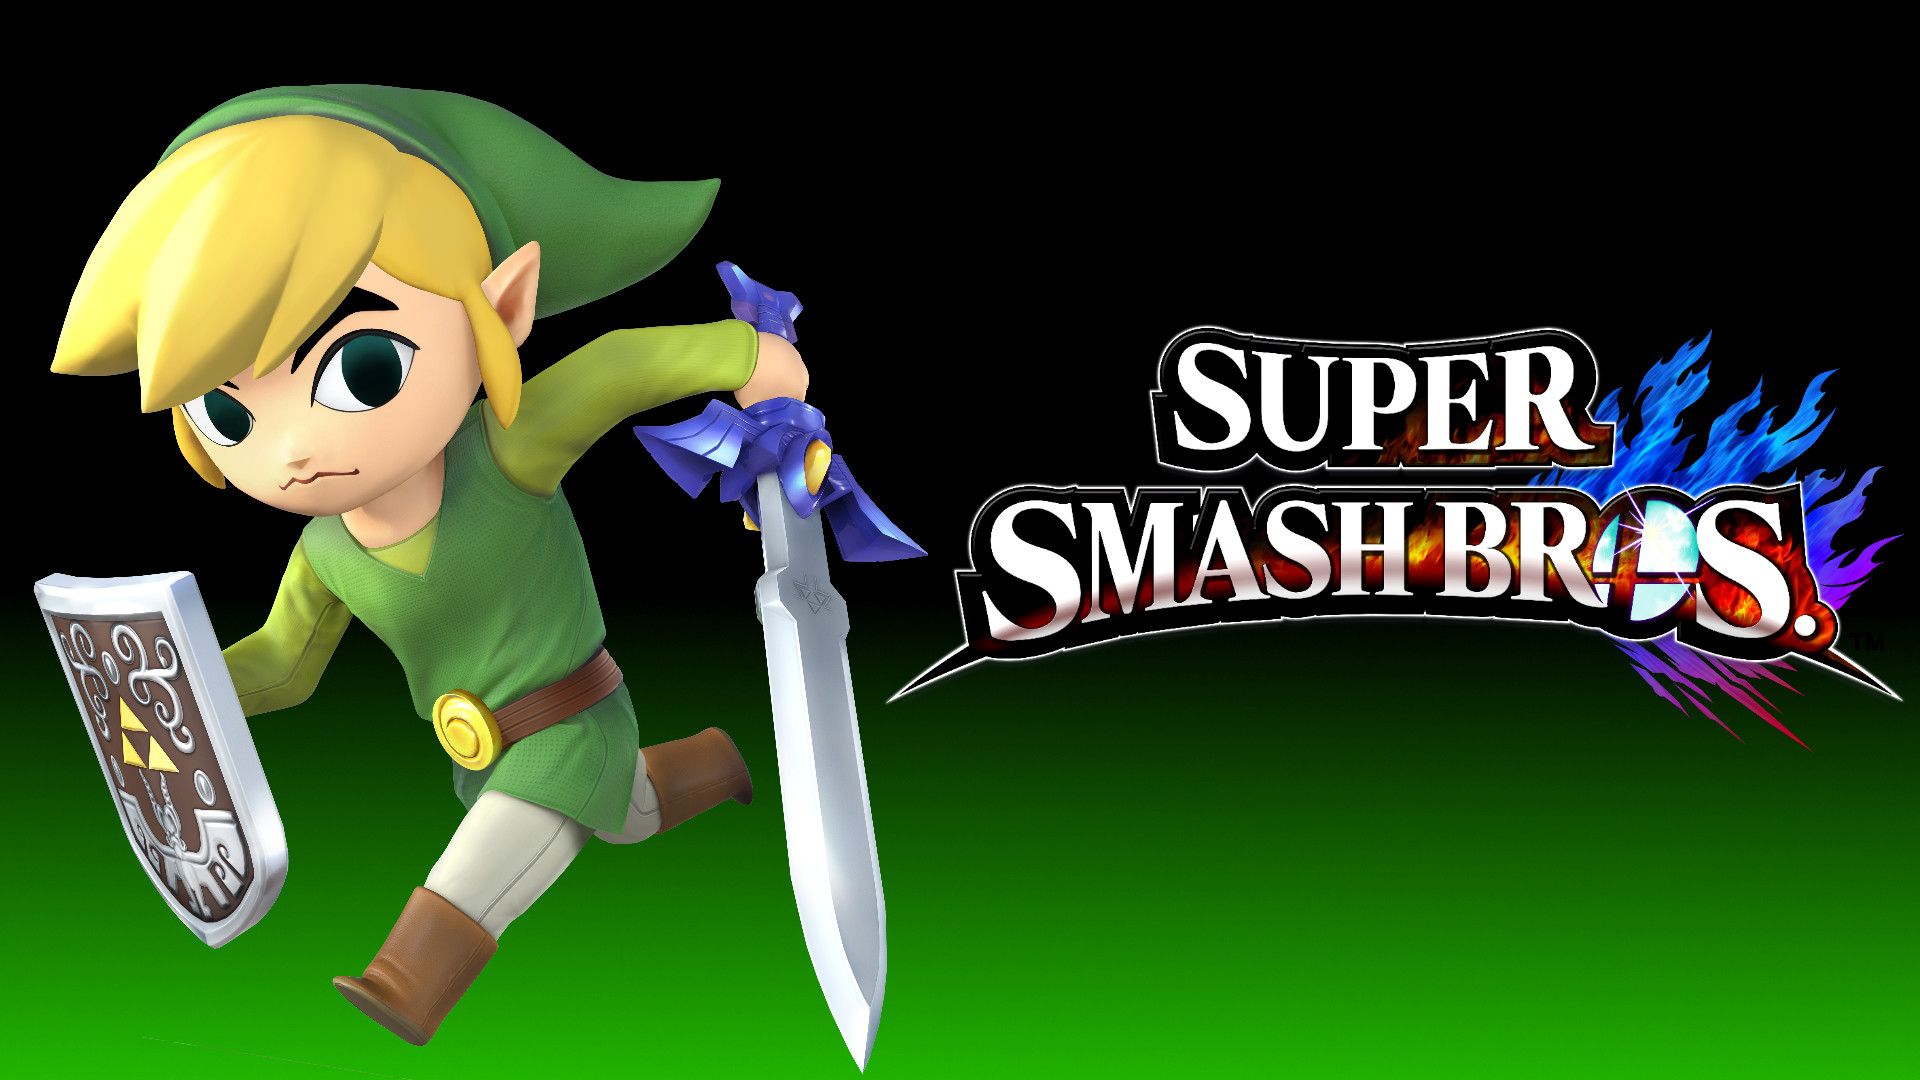 4 Wallpaper – Toon Link by TheWolfGalaxy